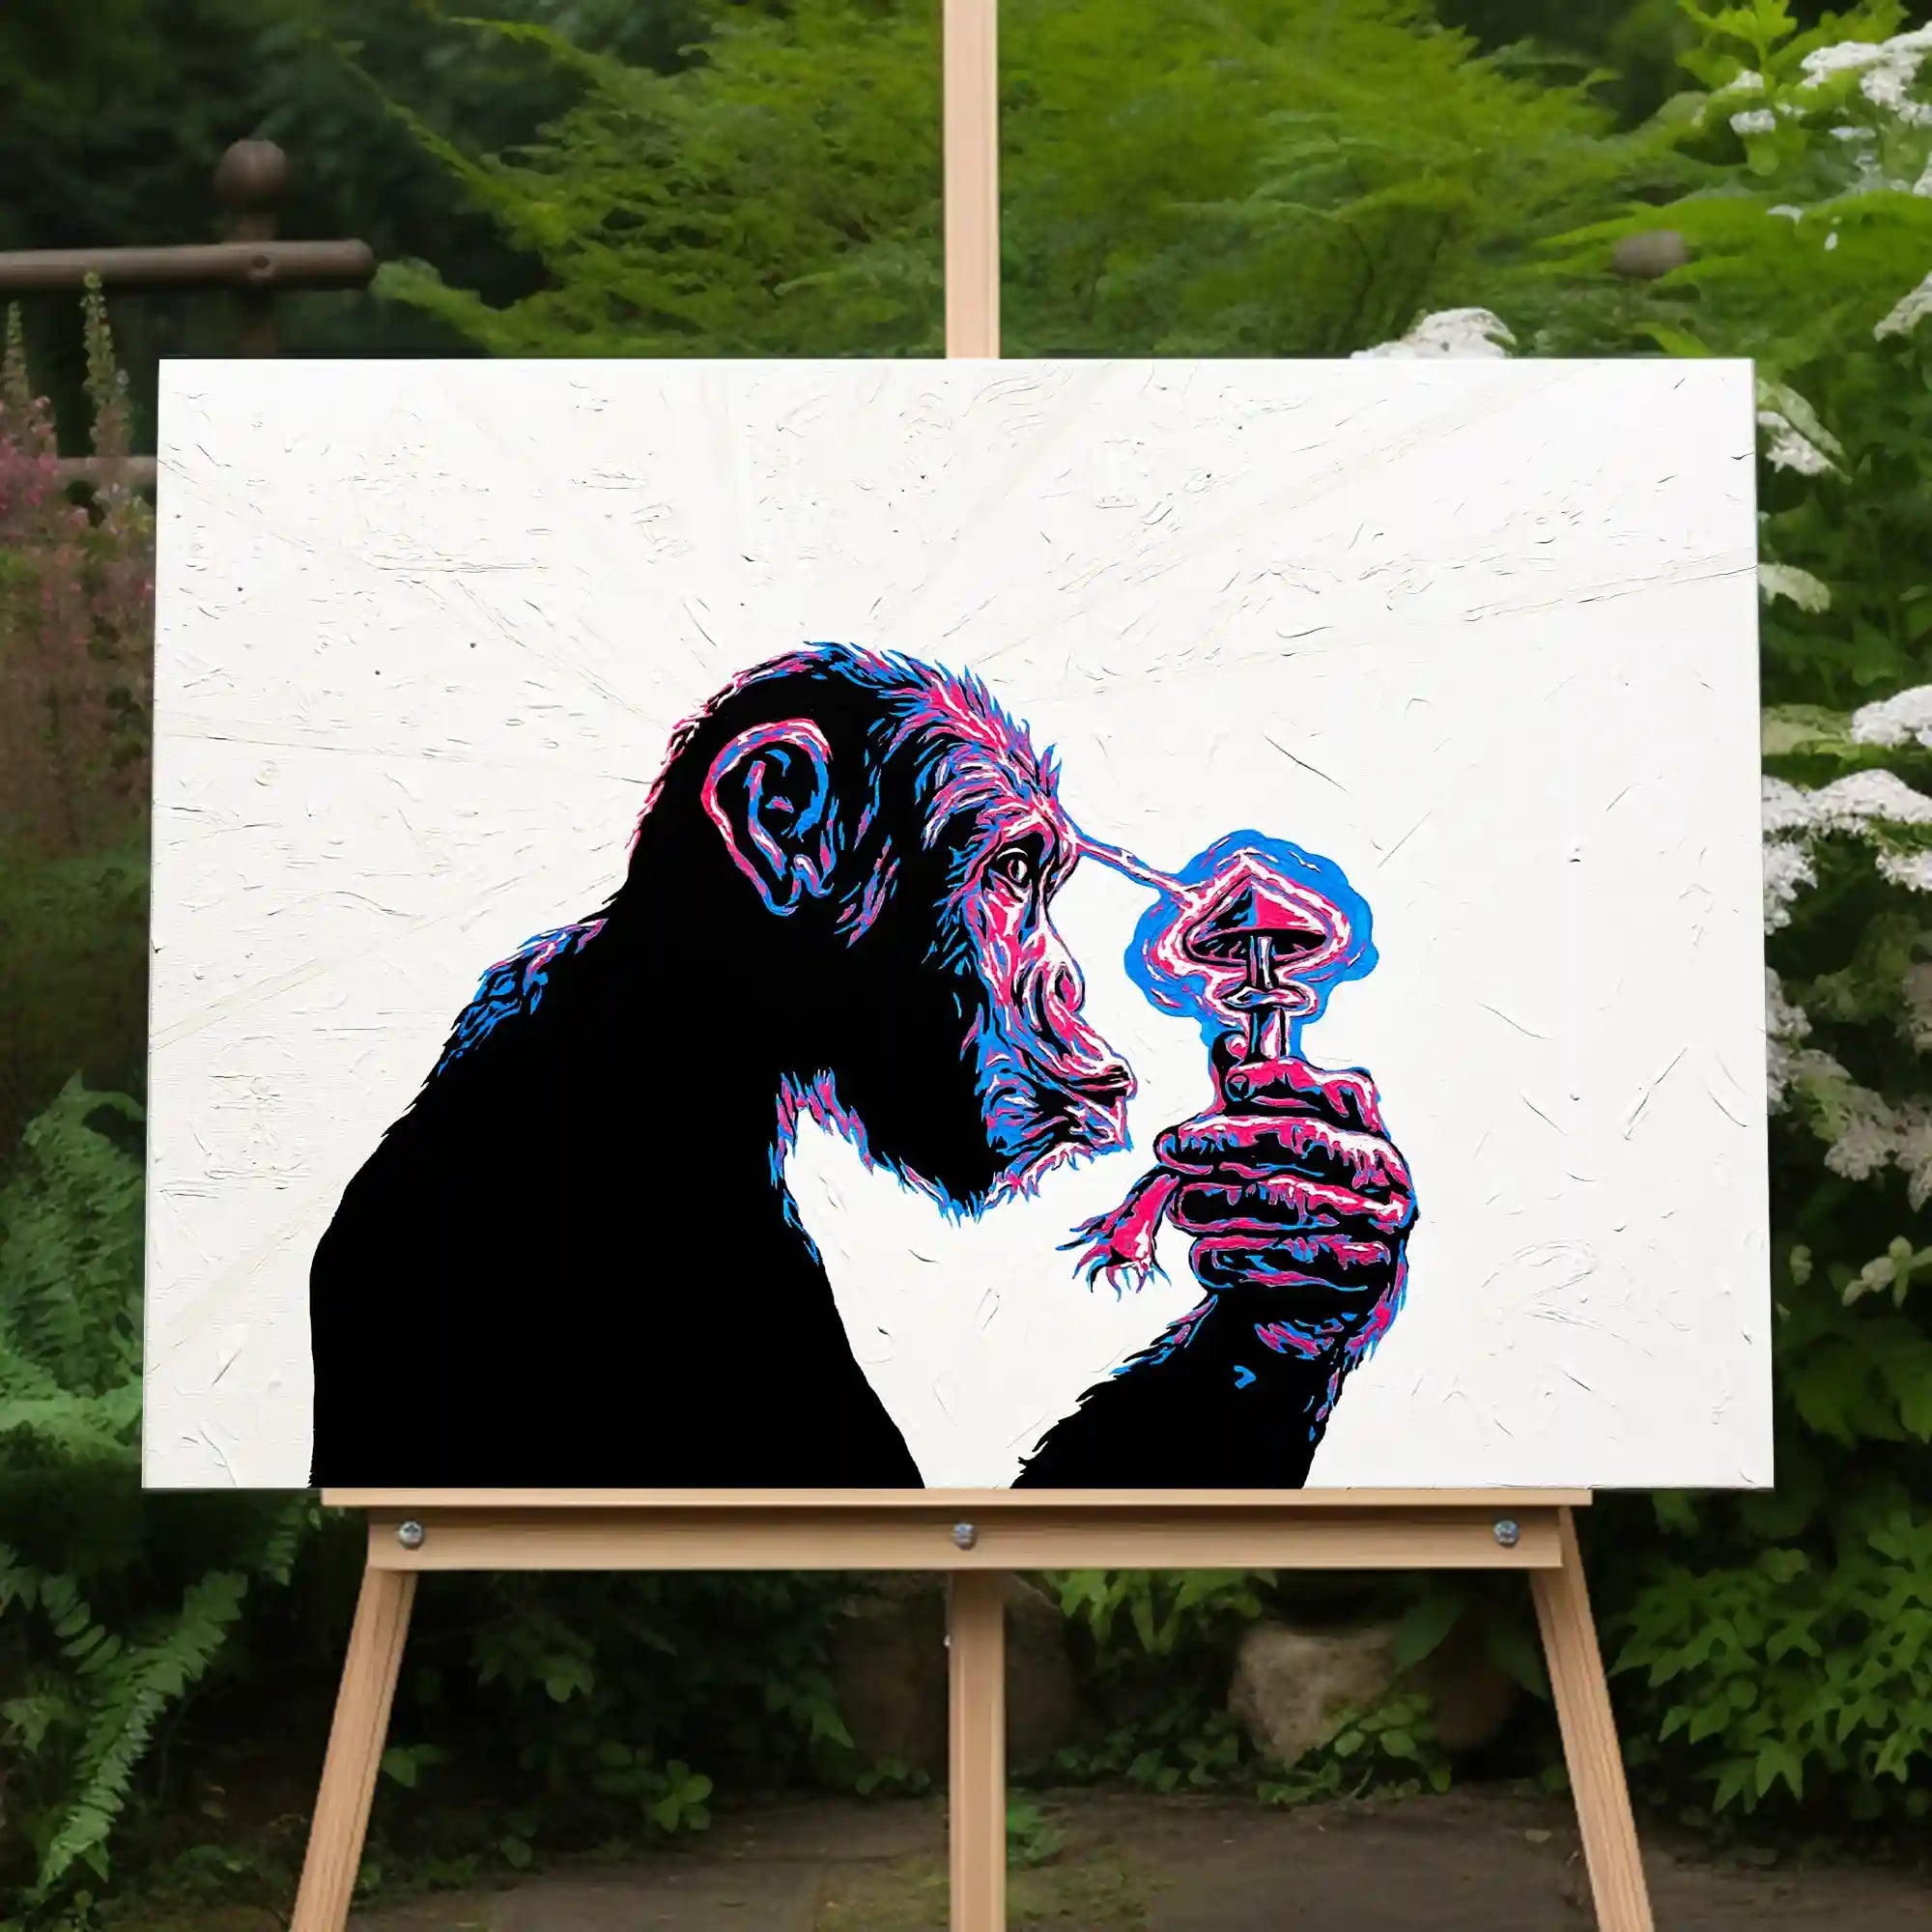 The Stoned Ape Theory '22